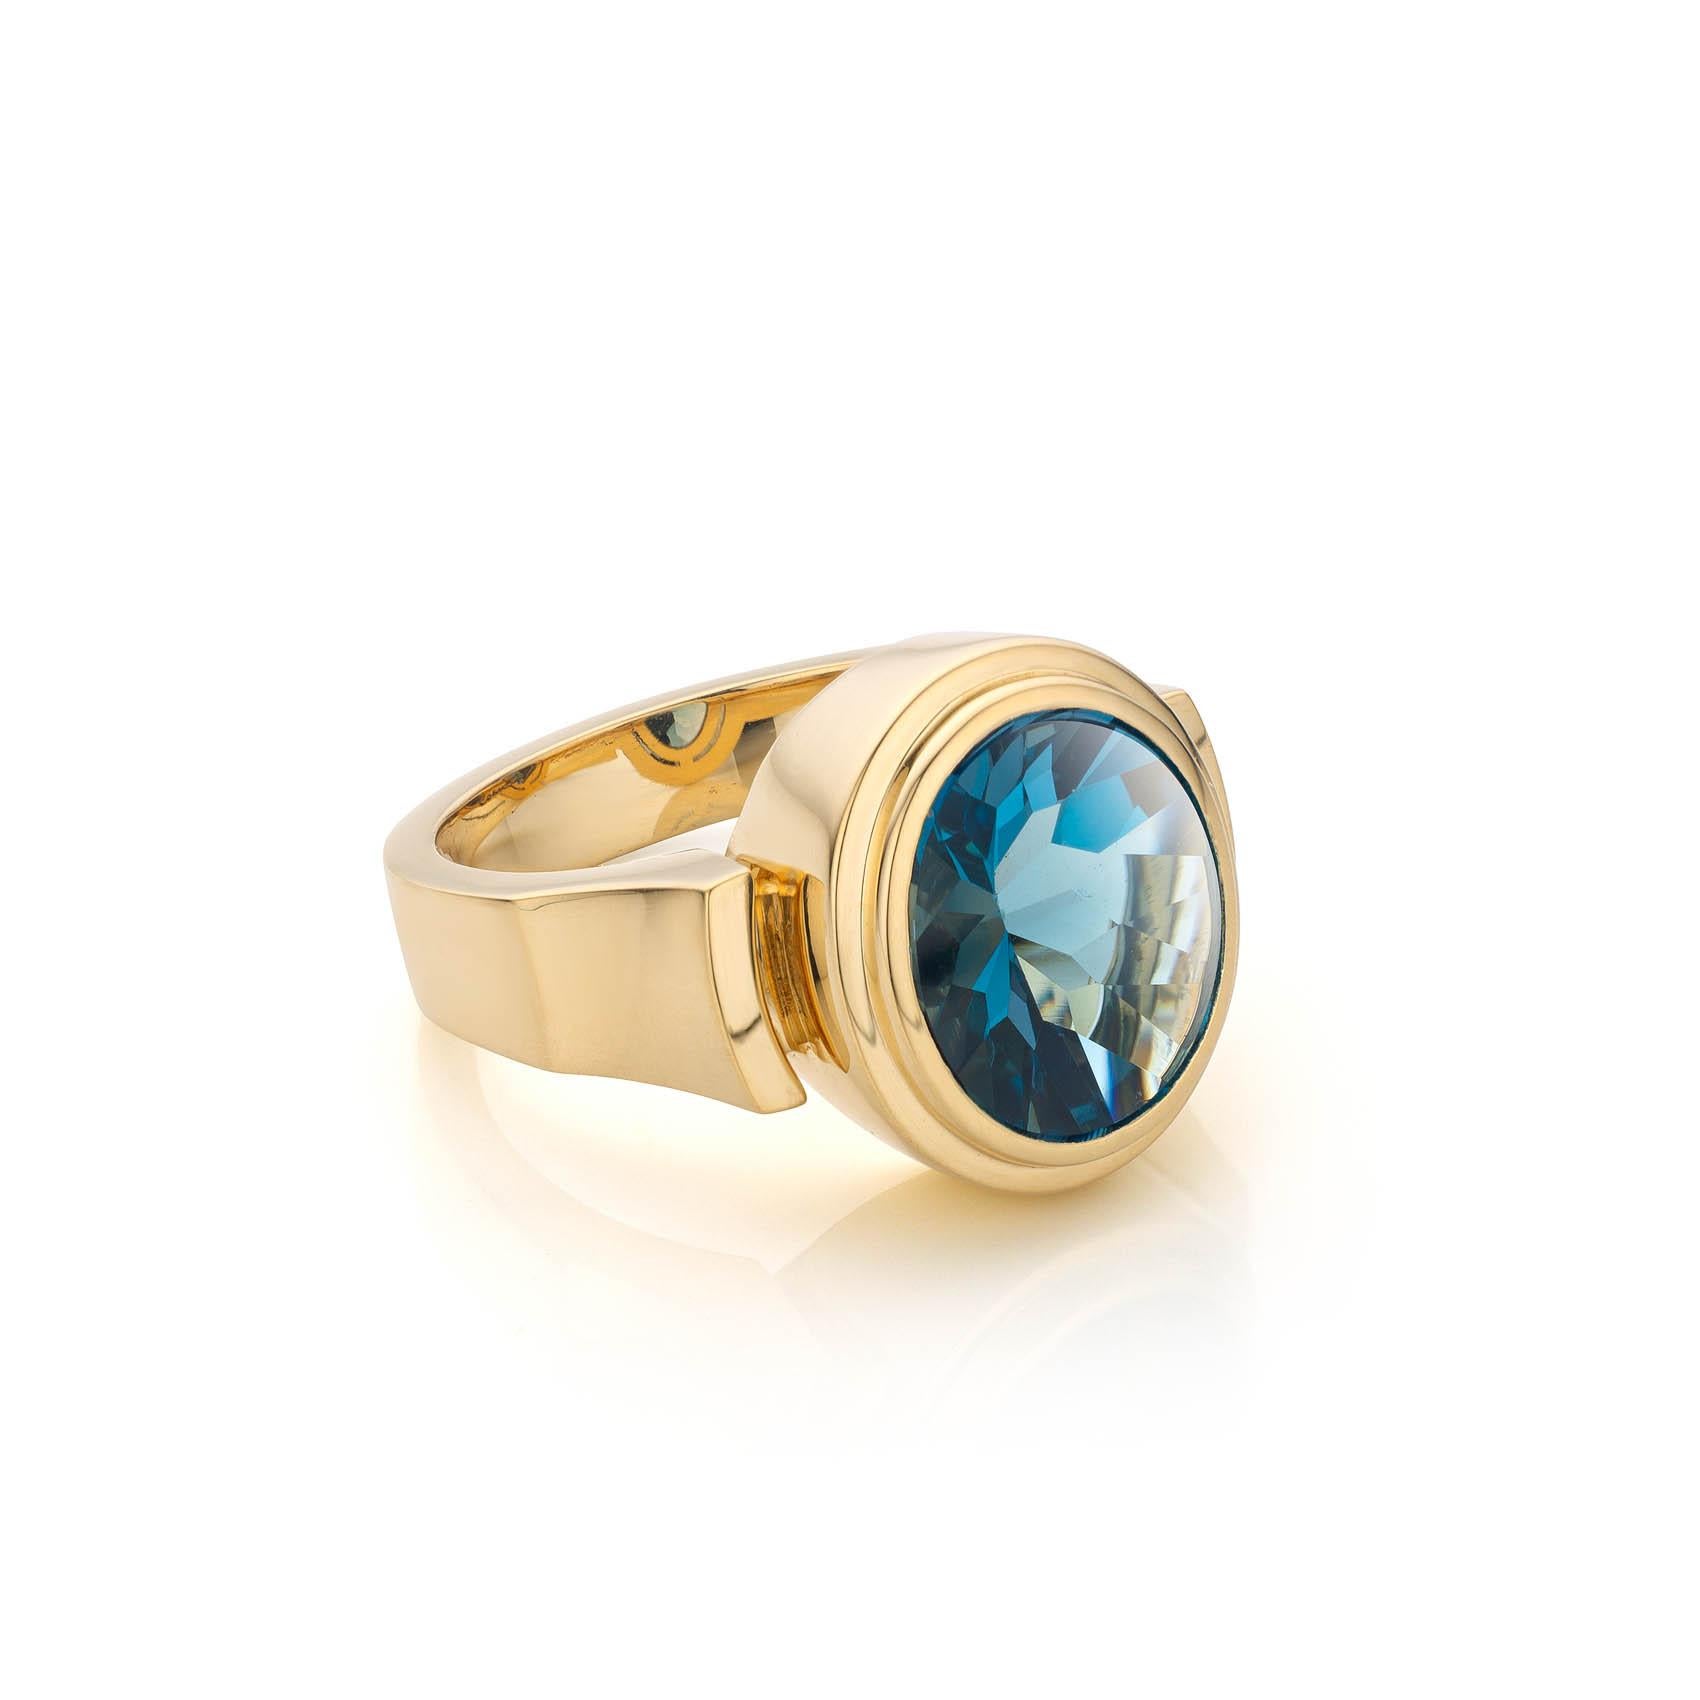 We invite you to see more of our collection from Cober Jewellery at 1stDibs!
You can type Cober Jewellery in the search bar to view more of our pieces of jewellery at our webshop.

14 Carat yellow gold signet ring. The 4,90 ct. bright blue Topaz